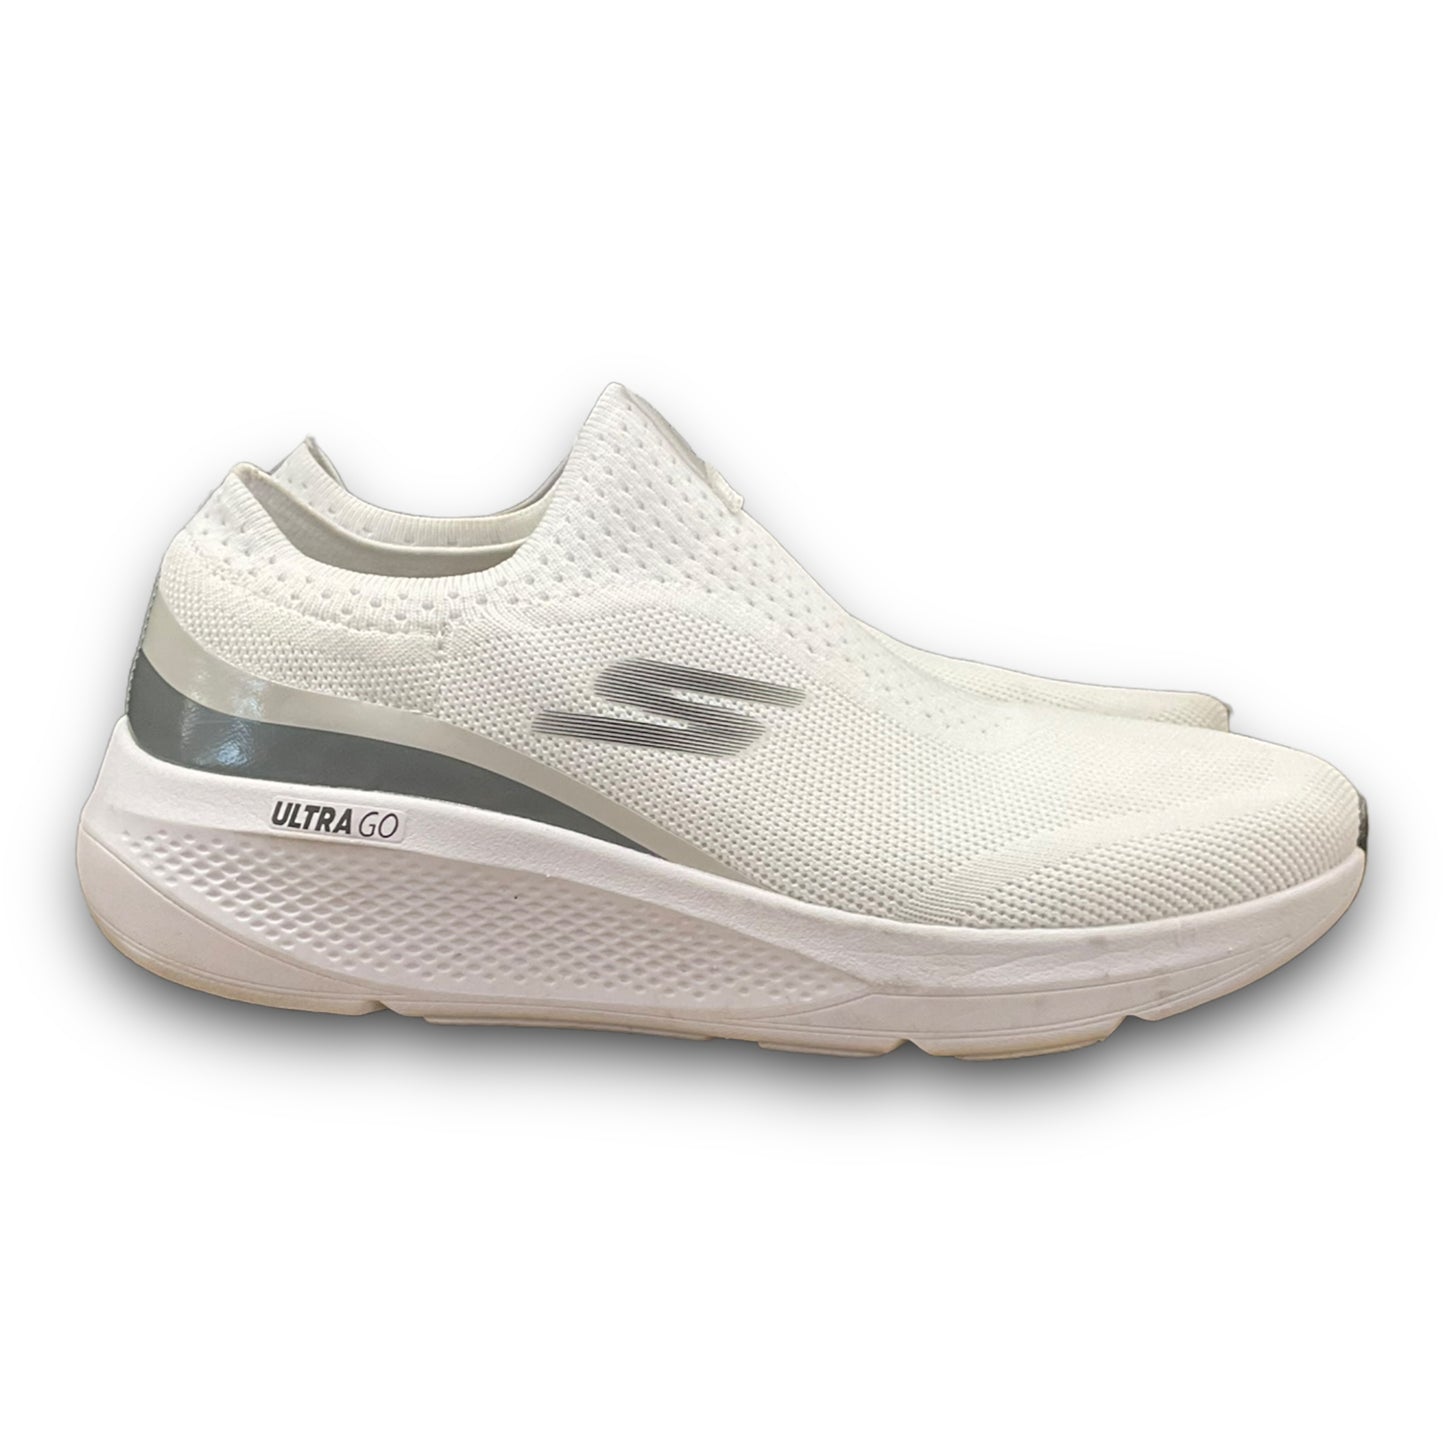 Shoes Athletic By Skechers  Size: 8.5